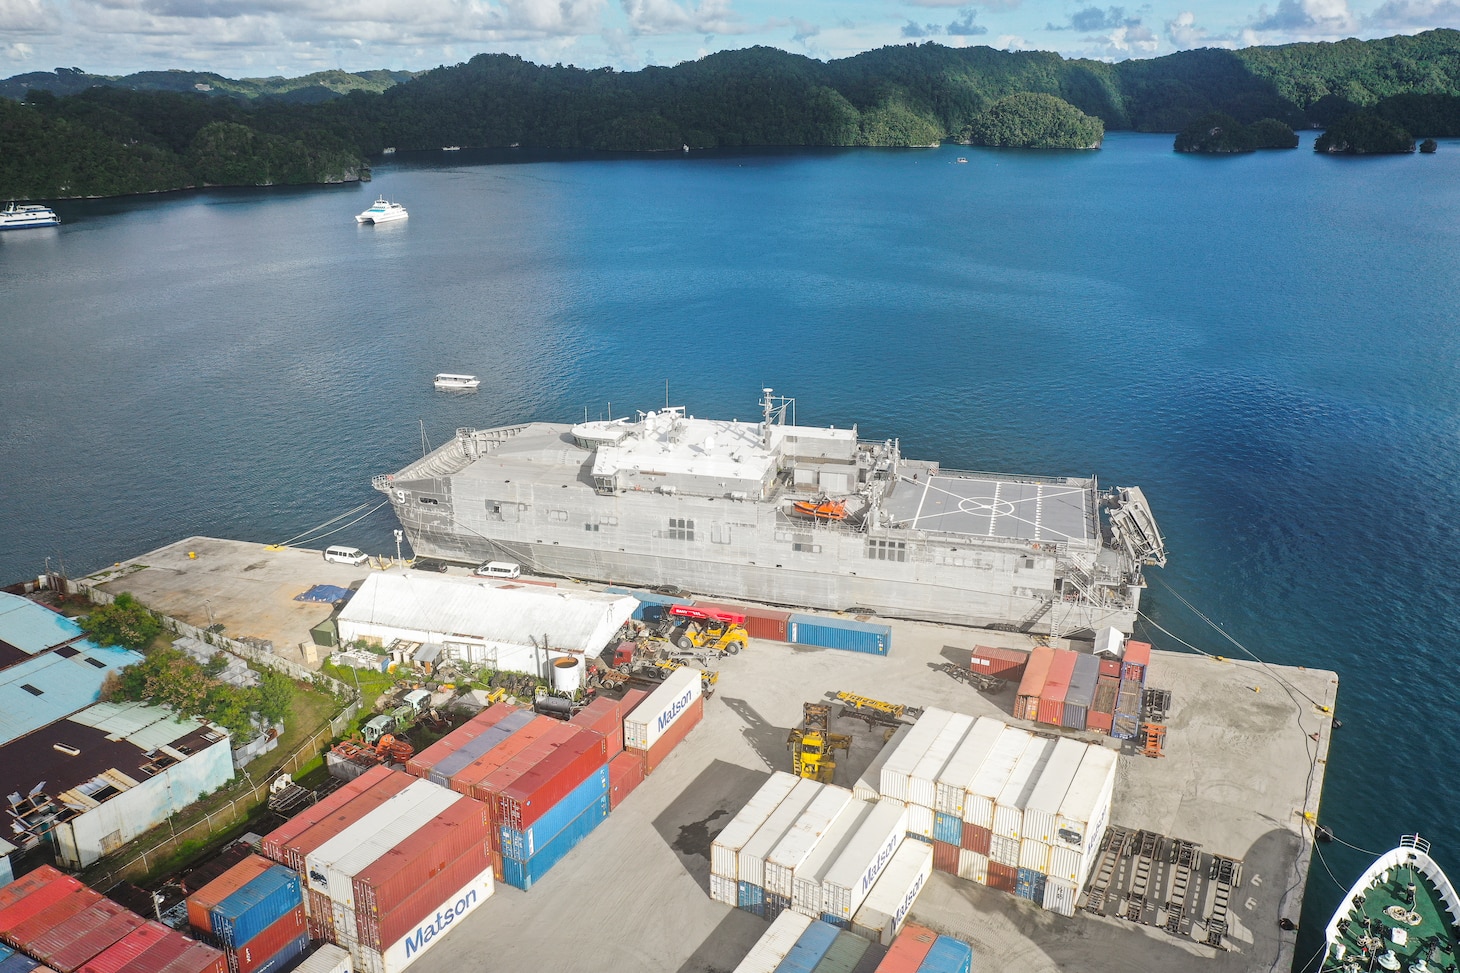 U.S. Military Sealift command's Spearhead-class expeditionary fast transport ship, City of Bismarck, floats while docked at the Commercial Seaport of Palau in Koror, Republic of Palau, Nov. 5, 2021. Military Sealift Command Far East ensures approximately 50 ships in the Indo-Pacific region, including City of Bismarck, are manned, trained and equipped to deliver essential supplies, fuel, cargo, and equipment to warfighters, both at sea and on shore. The ship is currently supporting Task Force Koa Moana 21, I Marine Expeditionary Force by transporting gear and personnel from California to the Republic of Palau. (U.S. Marine Corps photo by Cpl. Atticus Martinez)